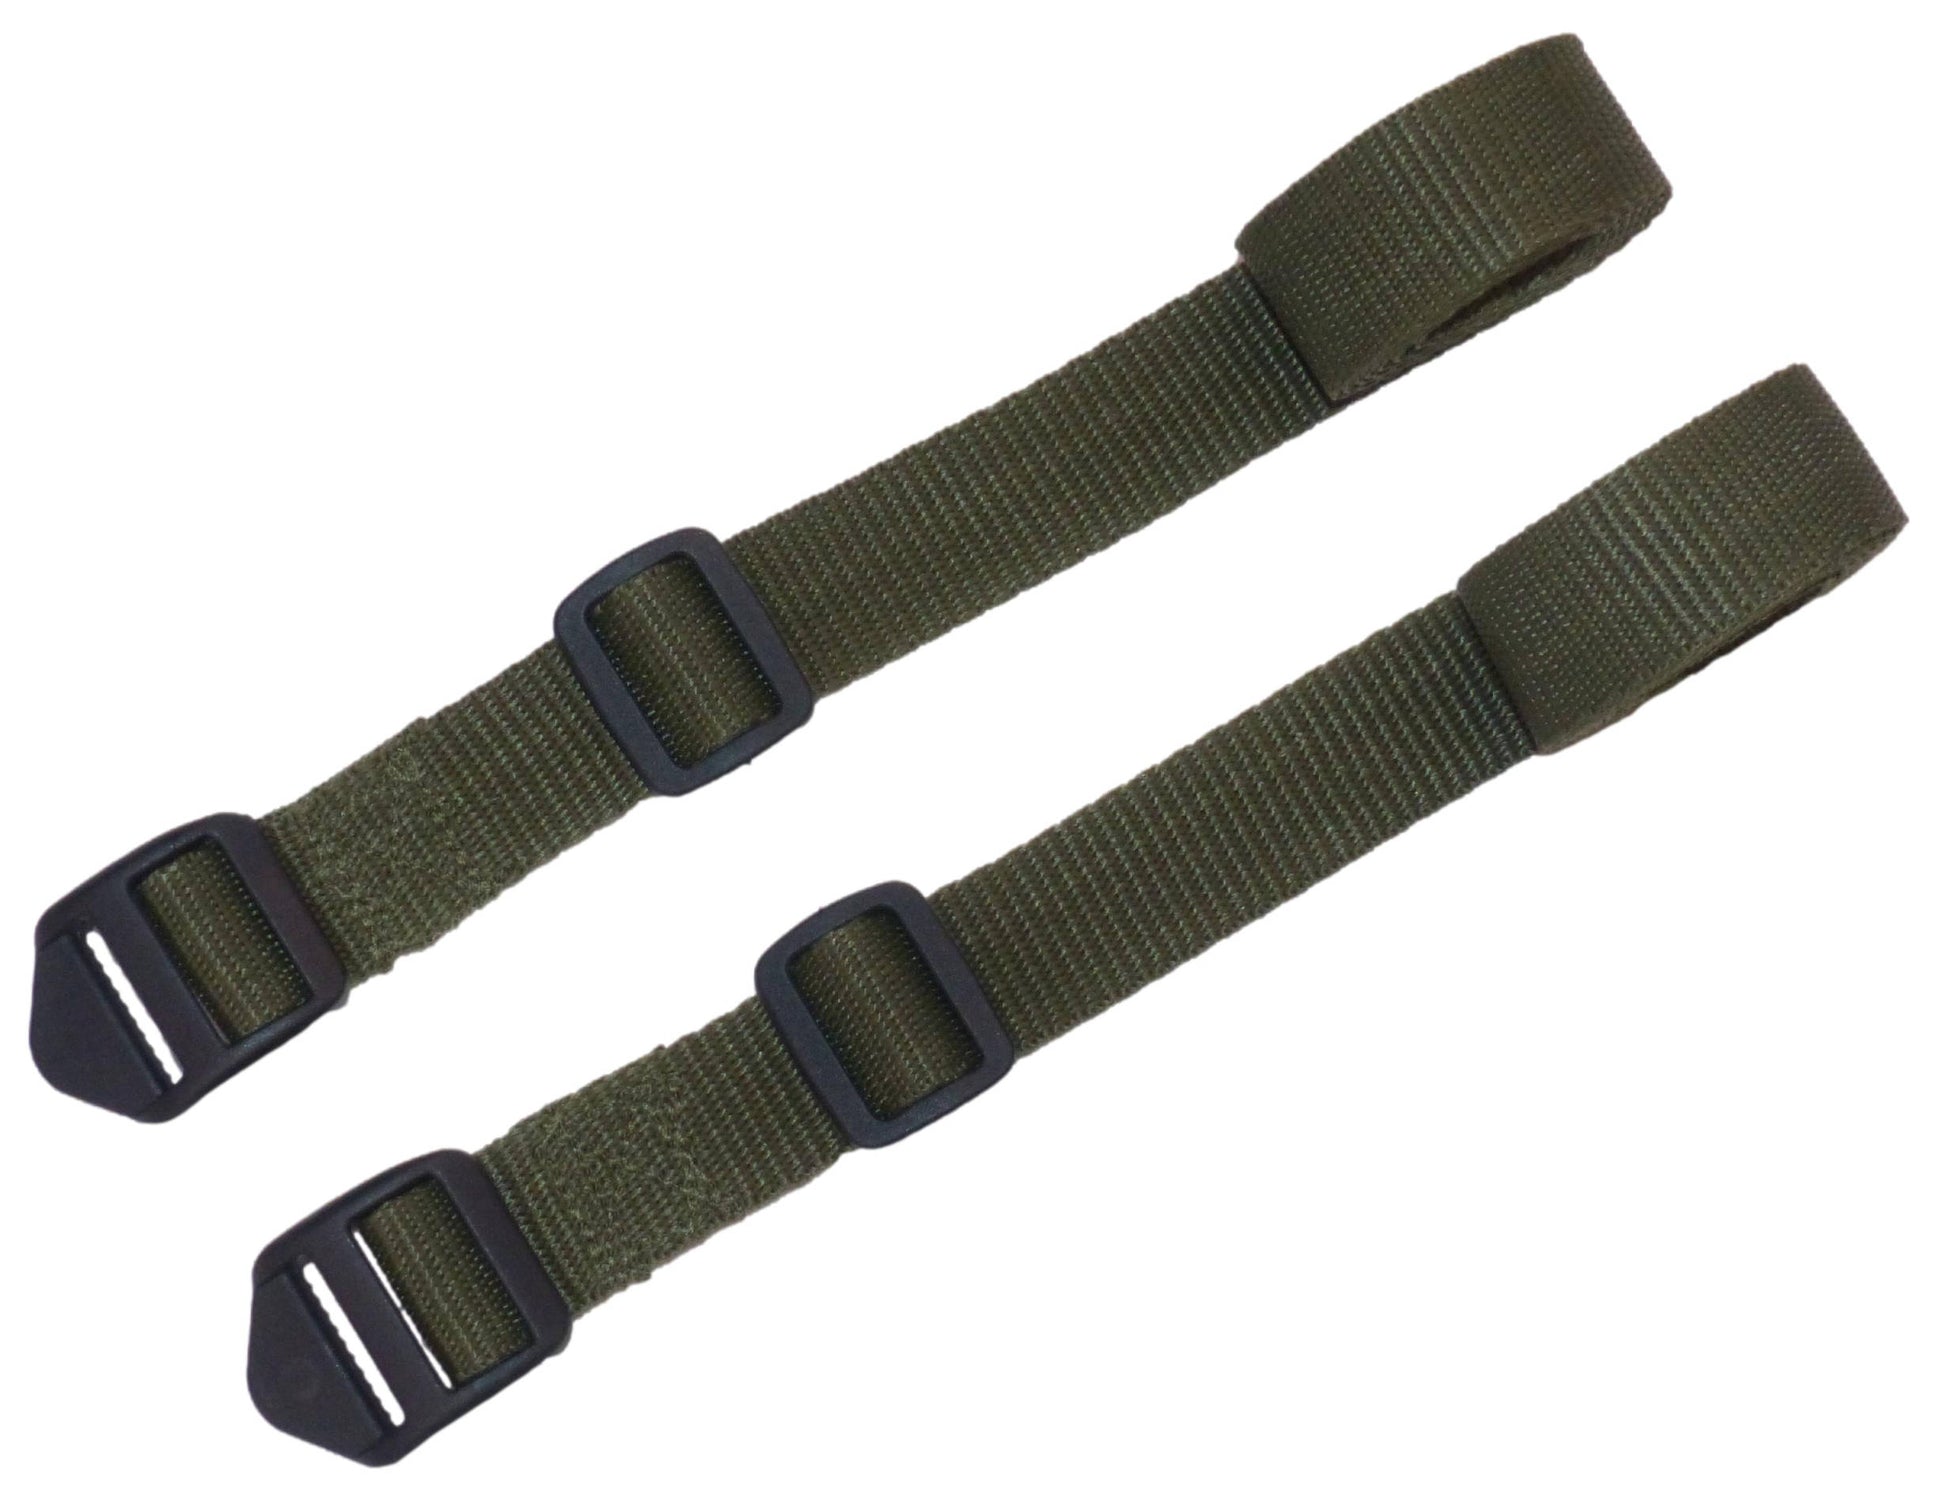 The Benristraps 25mm Camping Straps, 150cm (pair) in olive